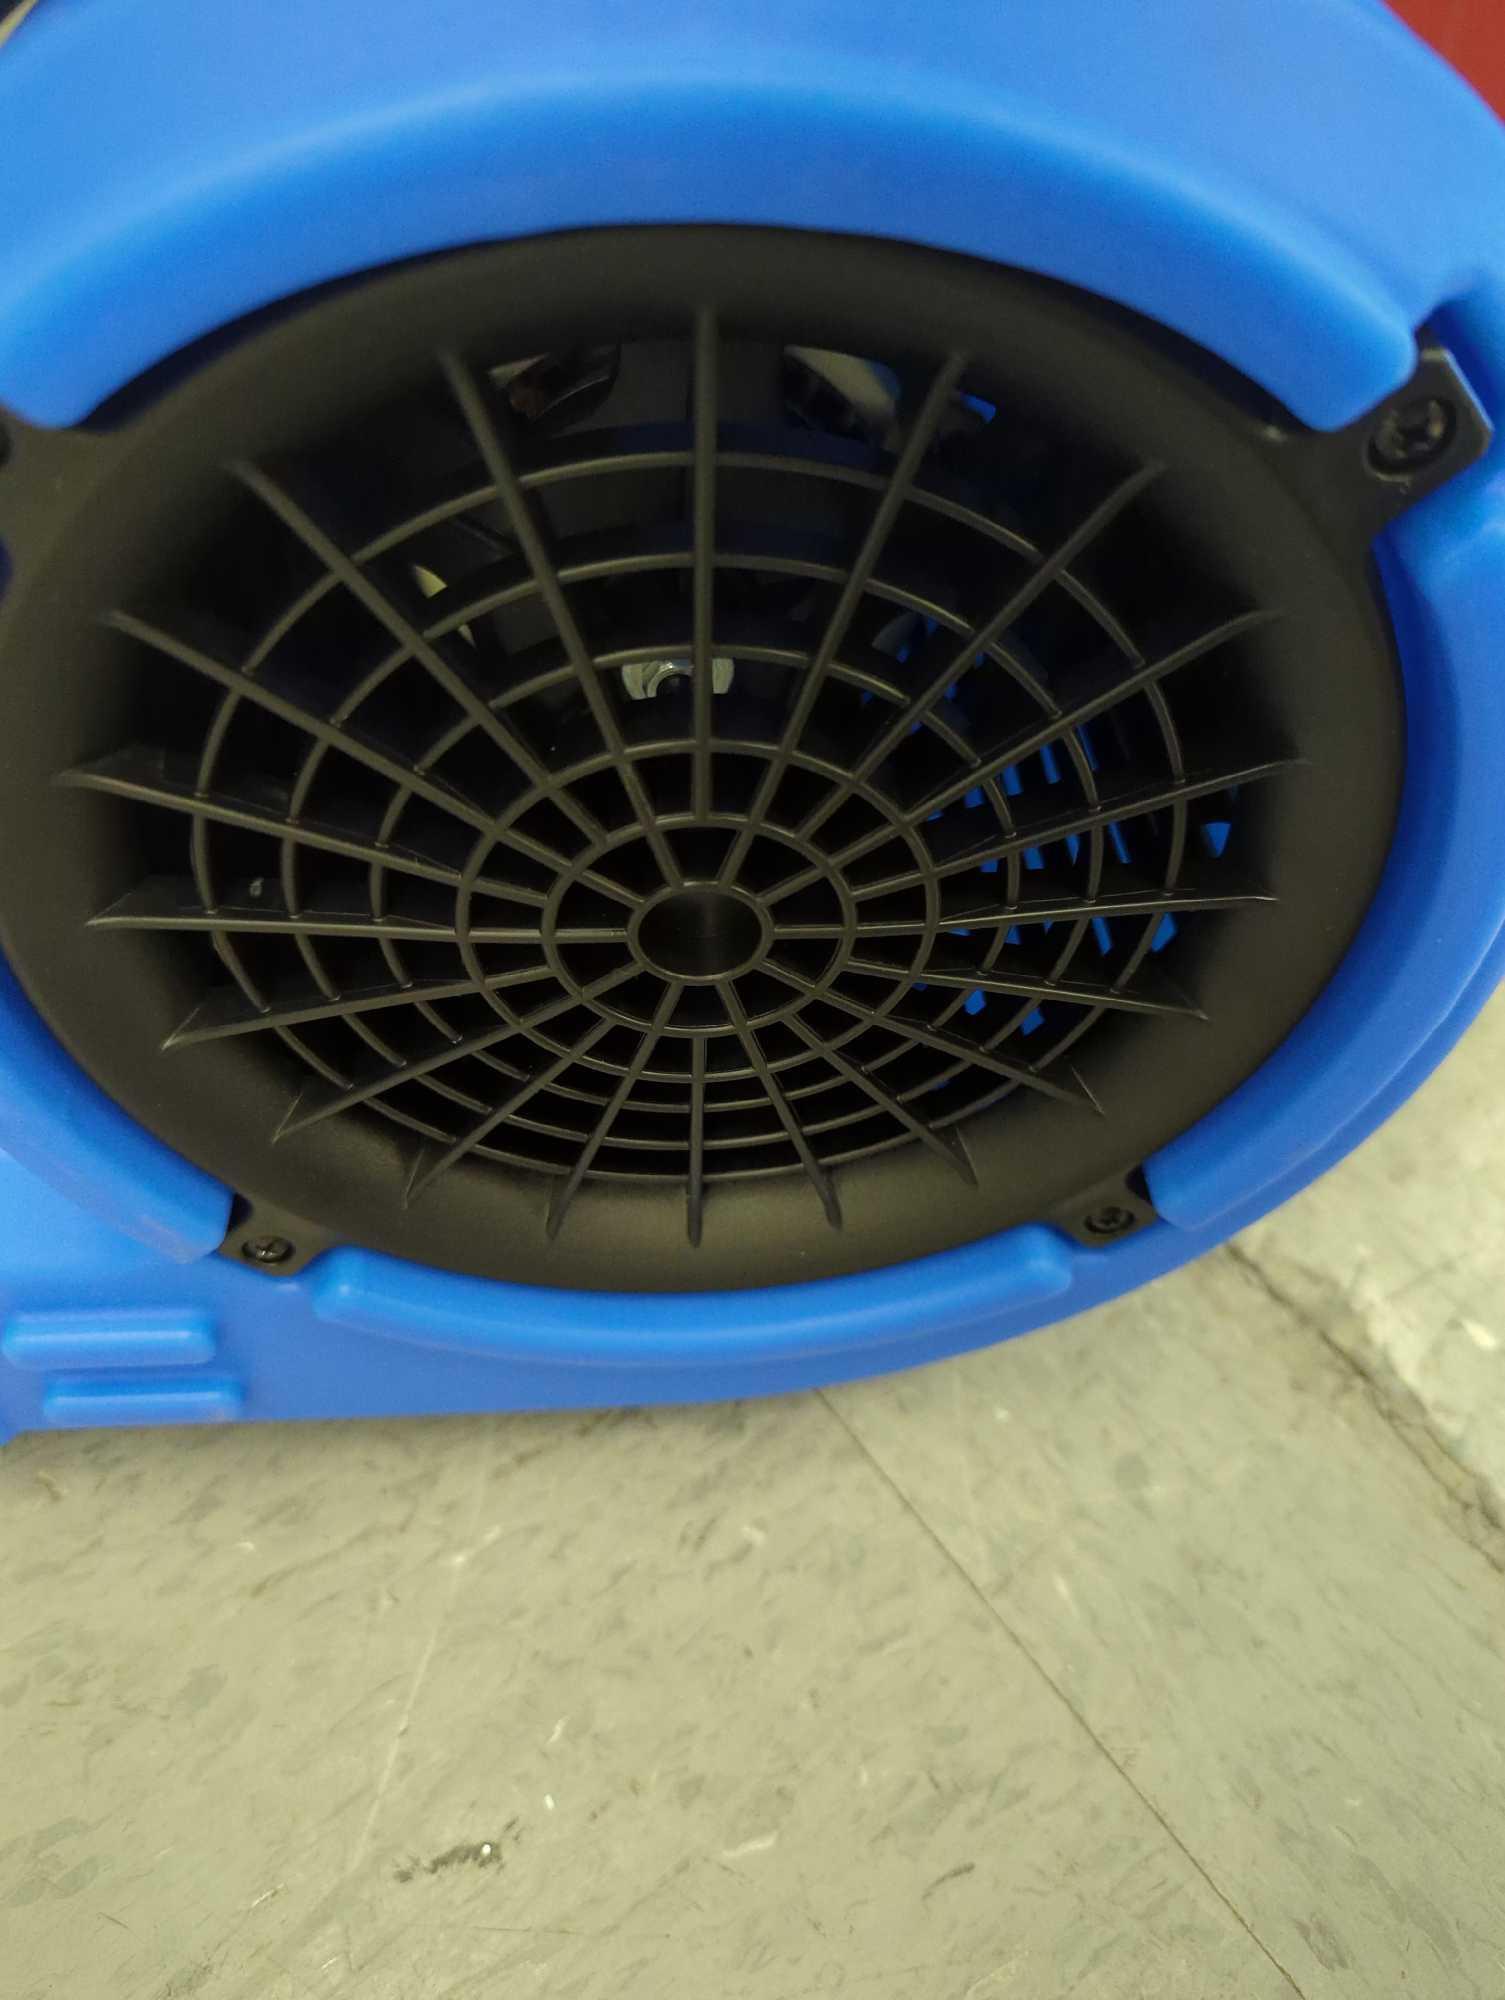 B-Air 1/8 HP Air Mover Carpet Dryer Floor Blower Fan for Home Use in Blue, Appears to be New in